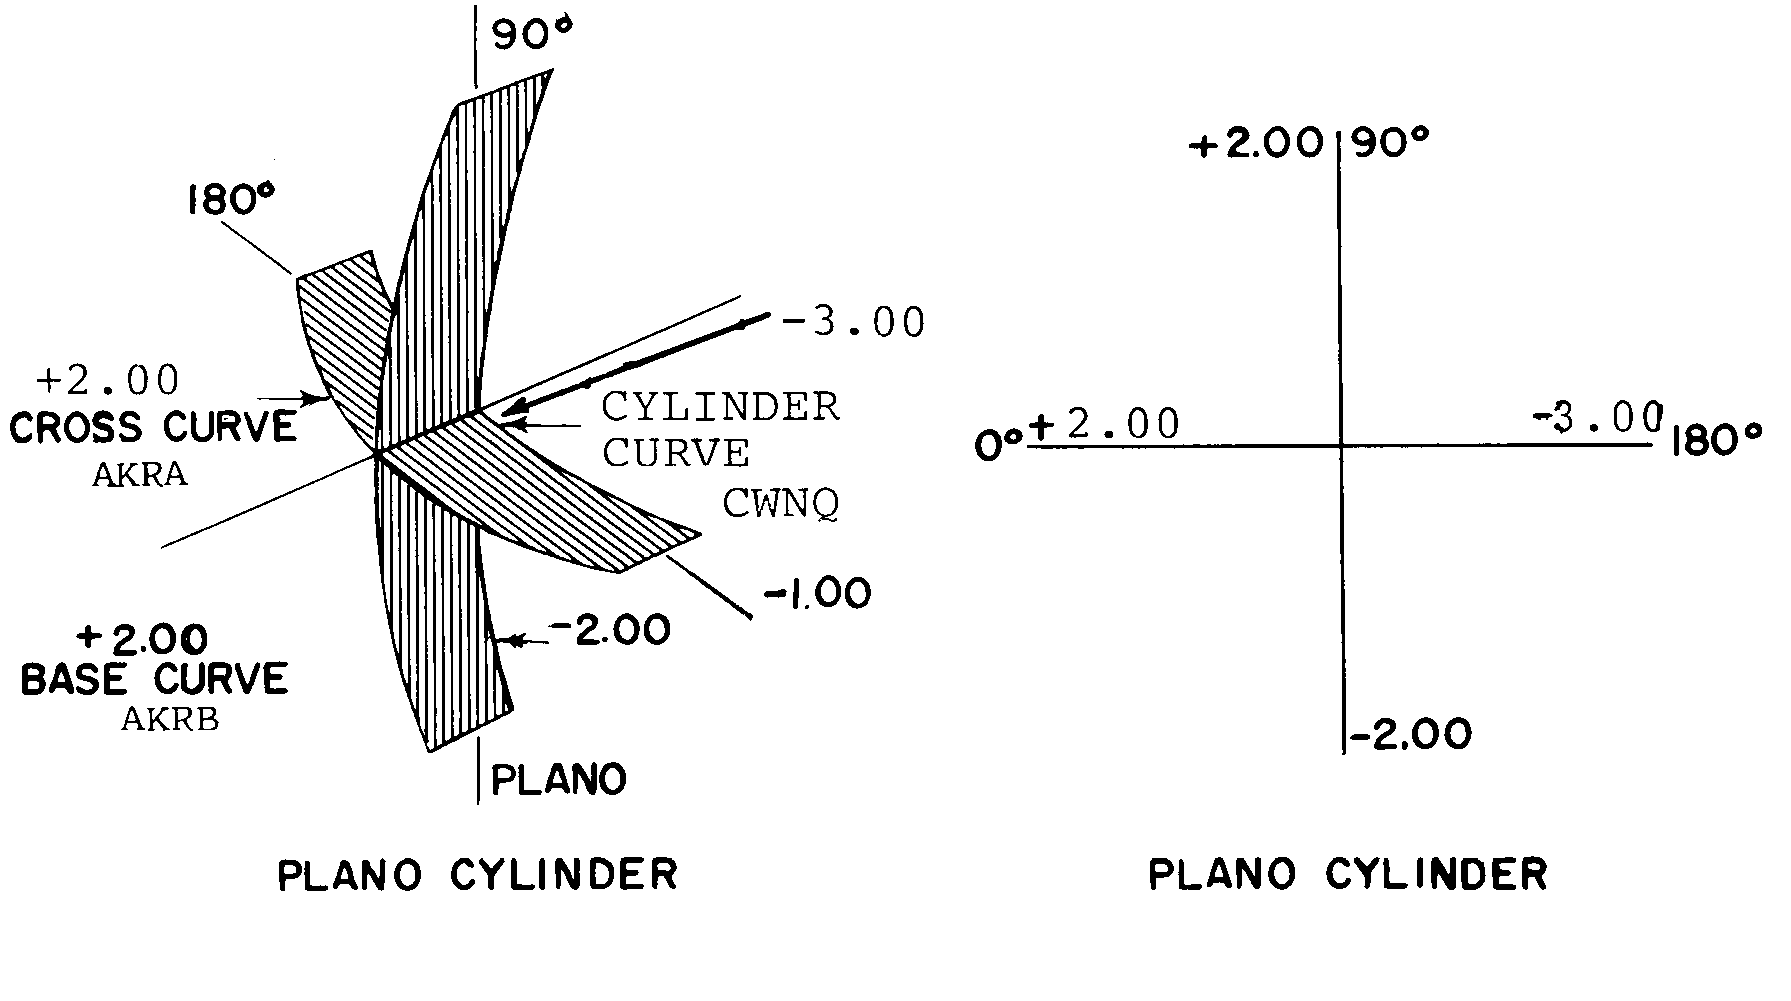 PLANO CYLINDER style nsn 6540-01-102-8256